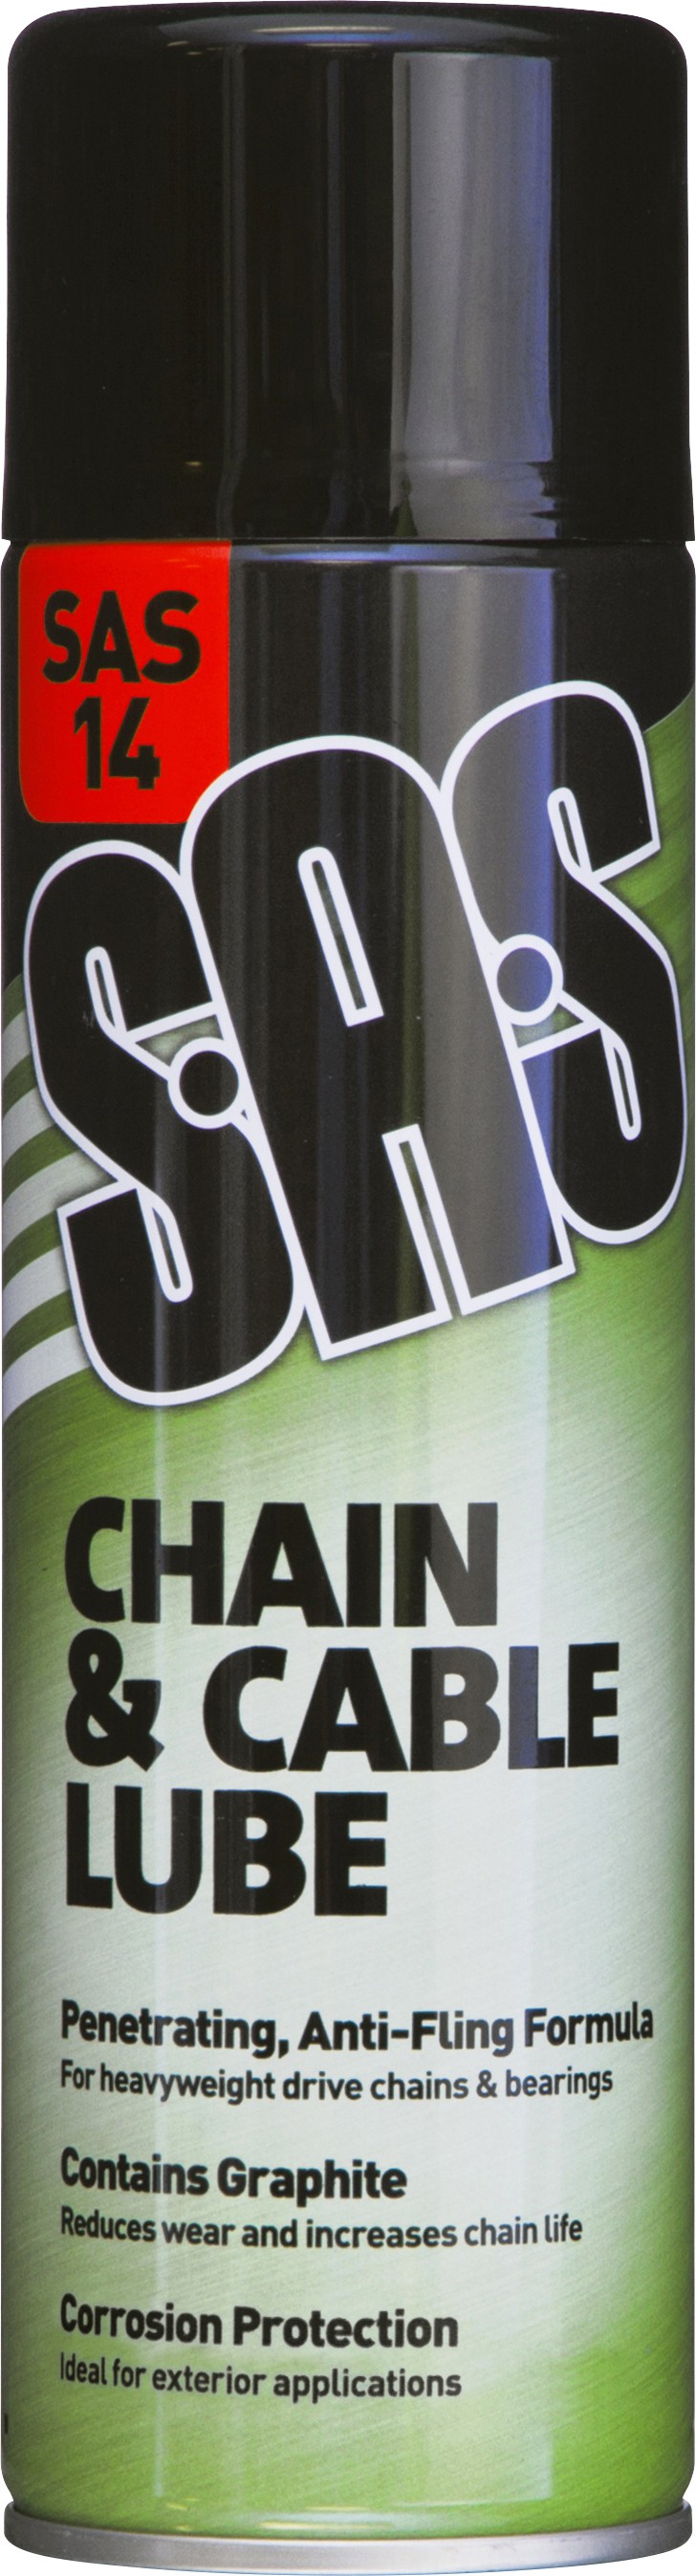 S.A.S Chain and Cable Lube